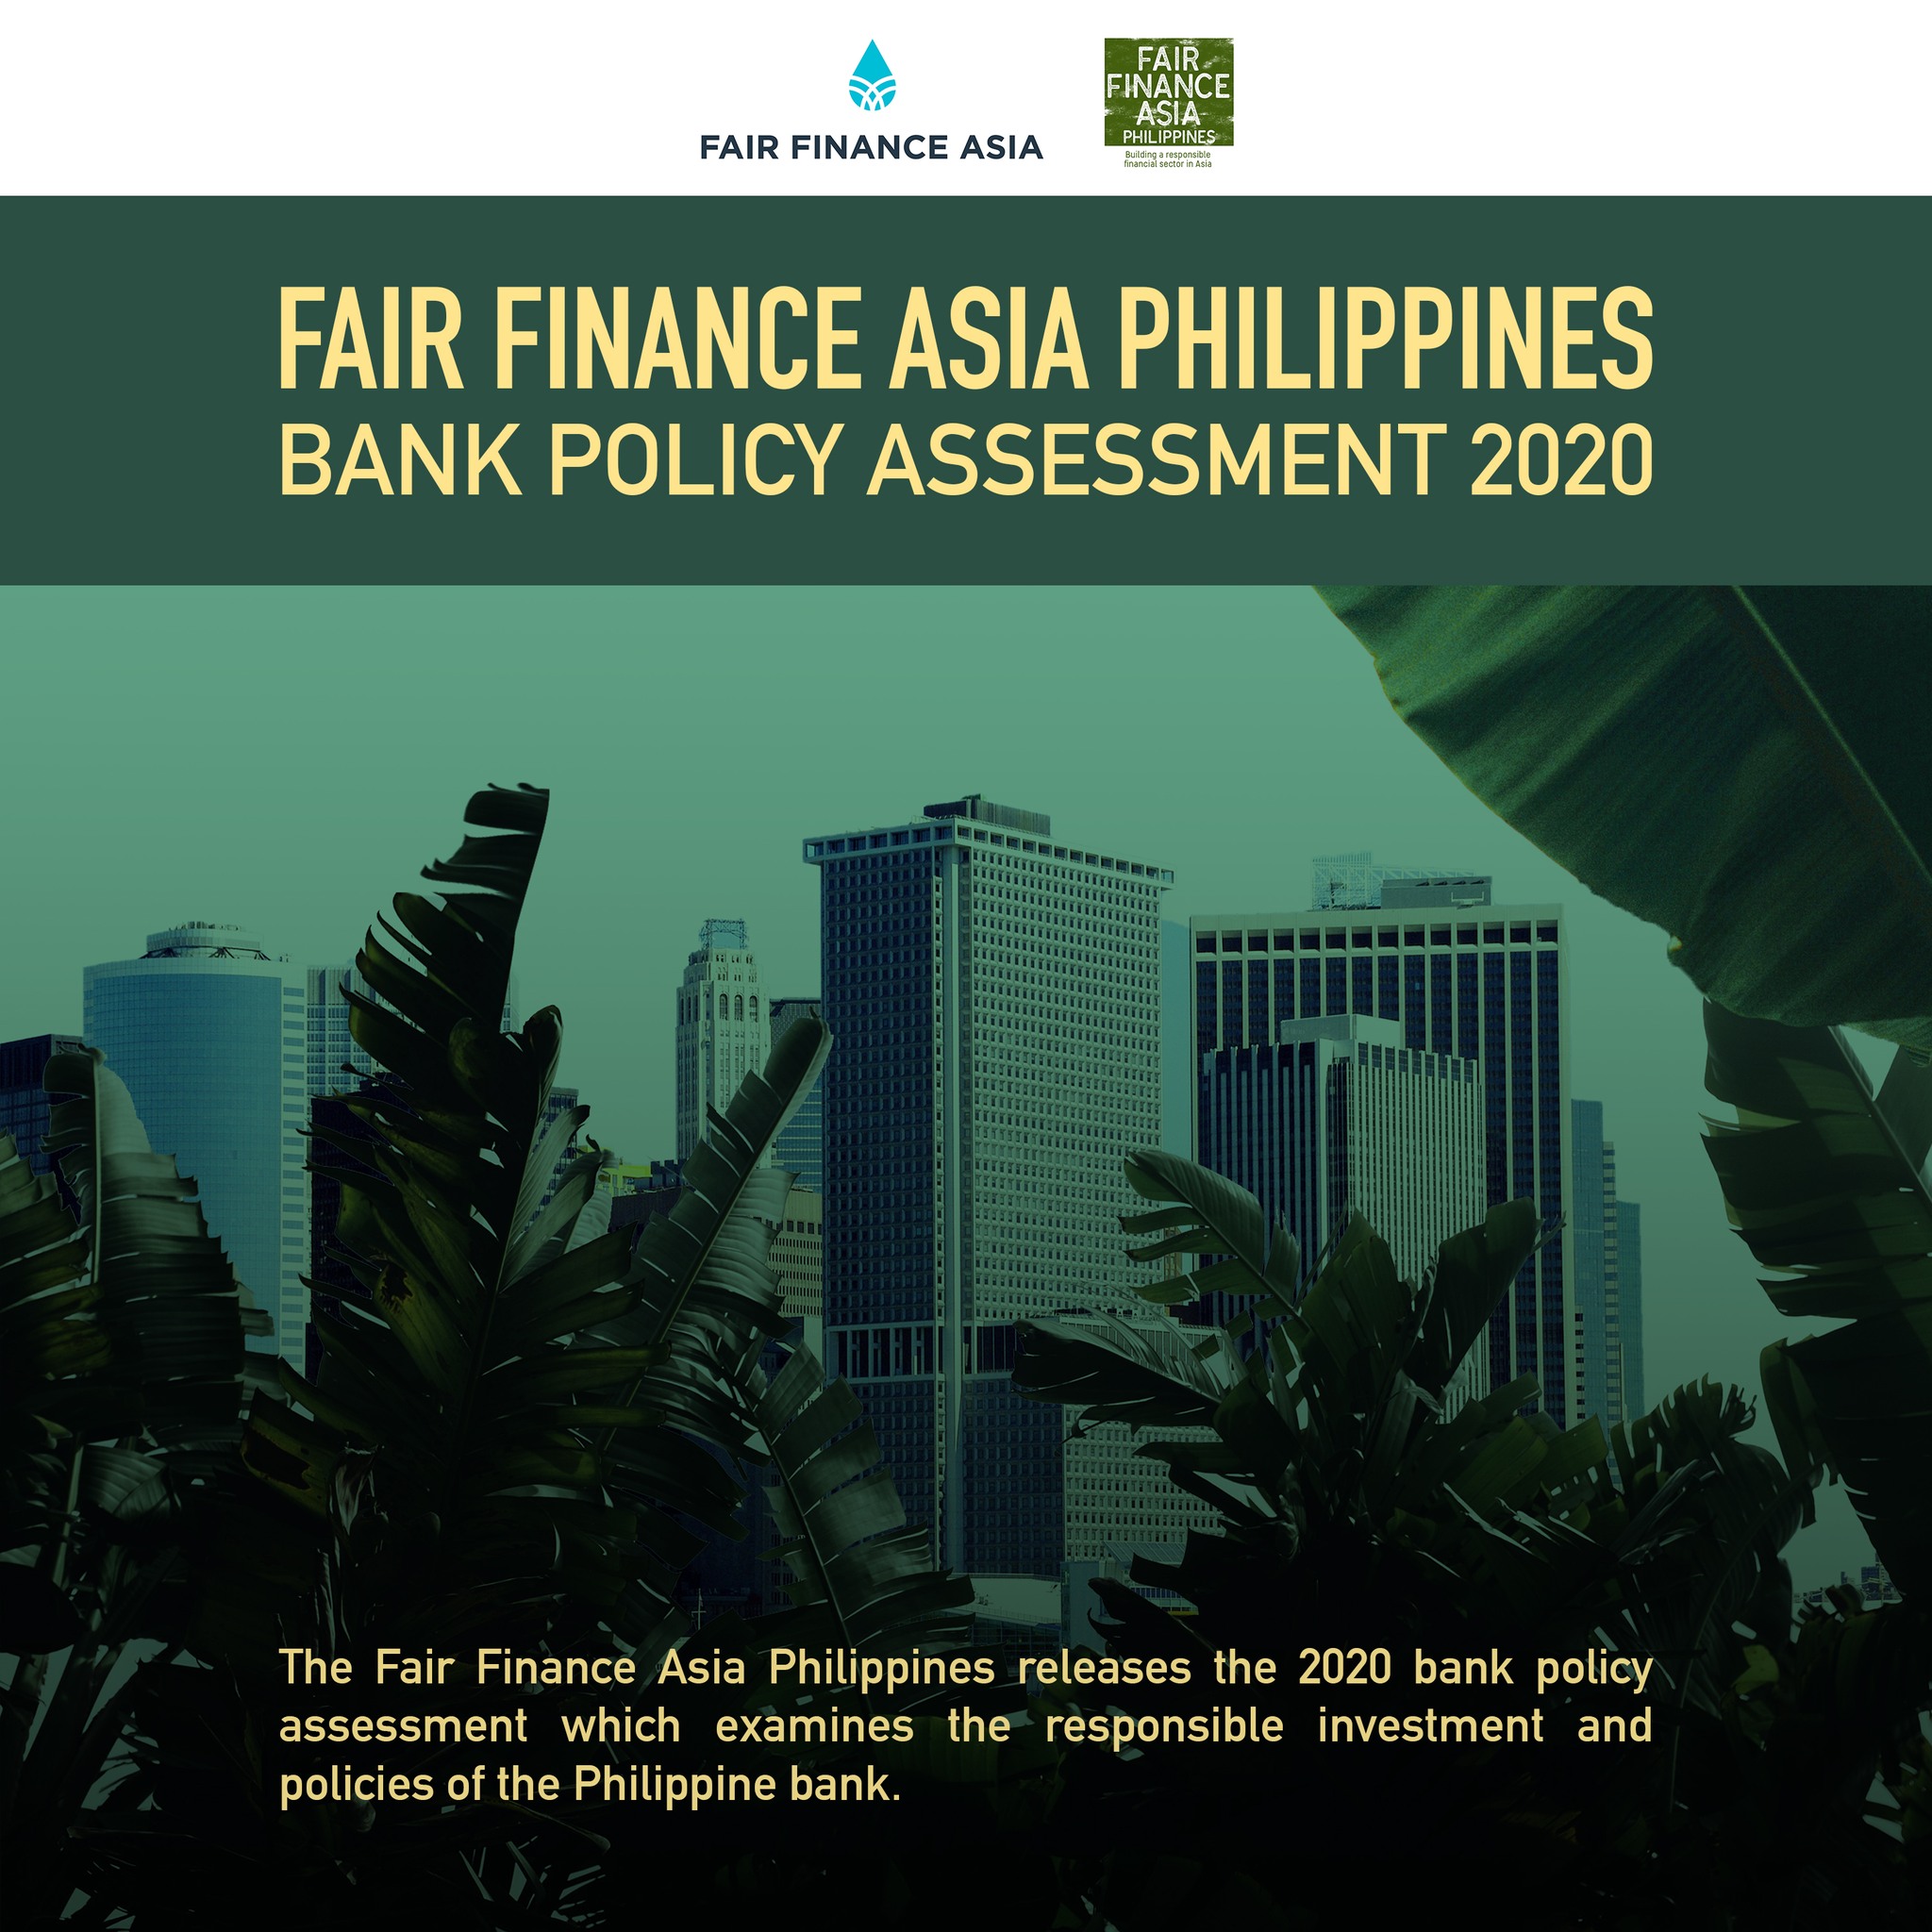 FAIR FINANCE PHILIPPINES BANK POLICY ASSESSMENT 2020